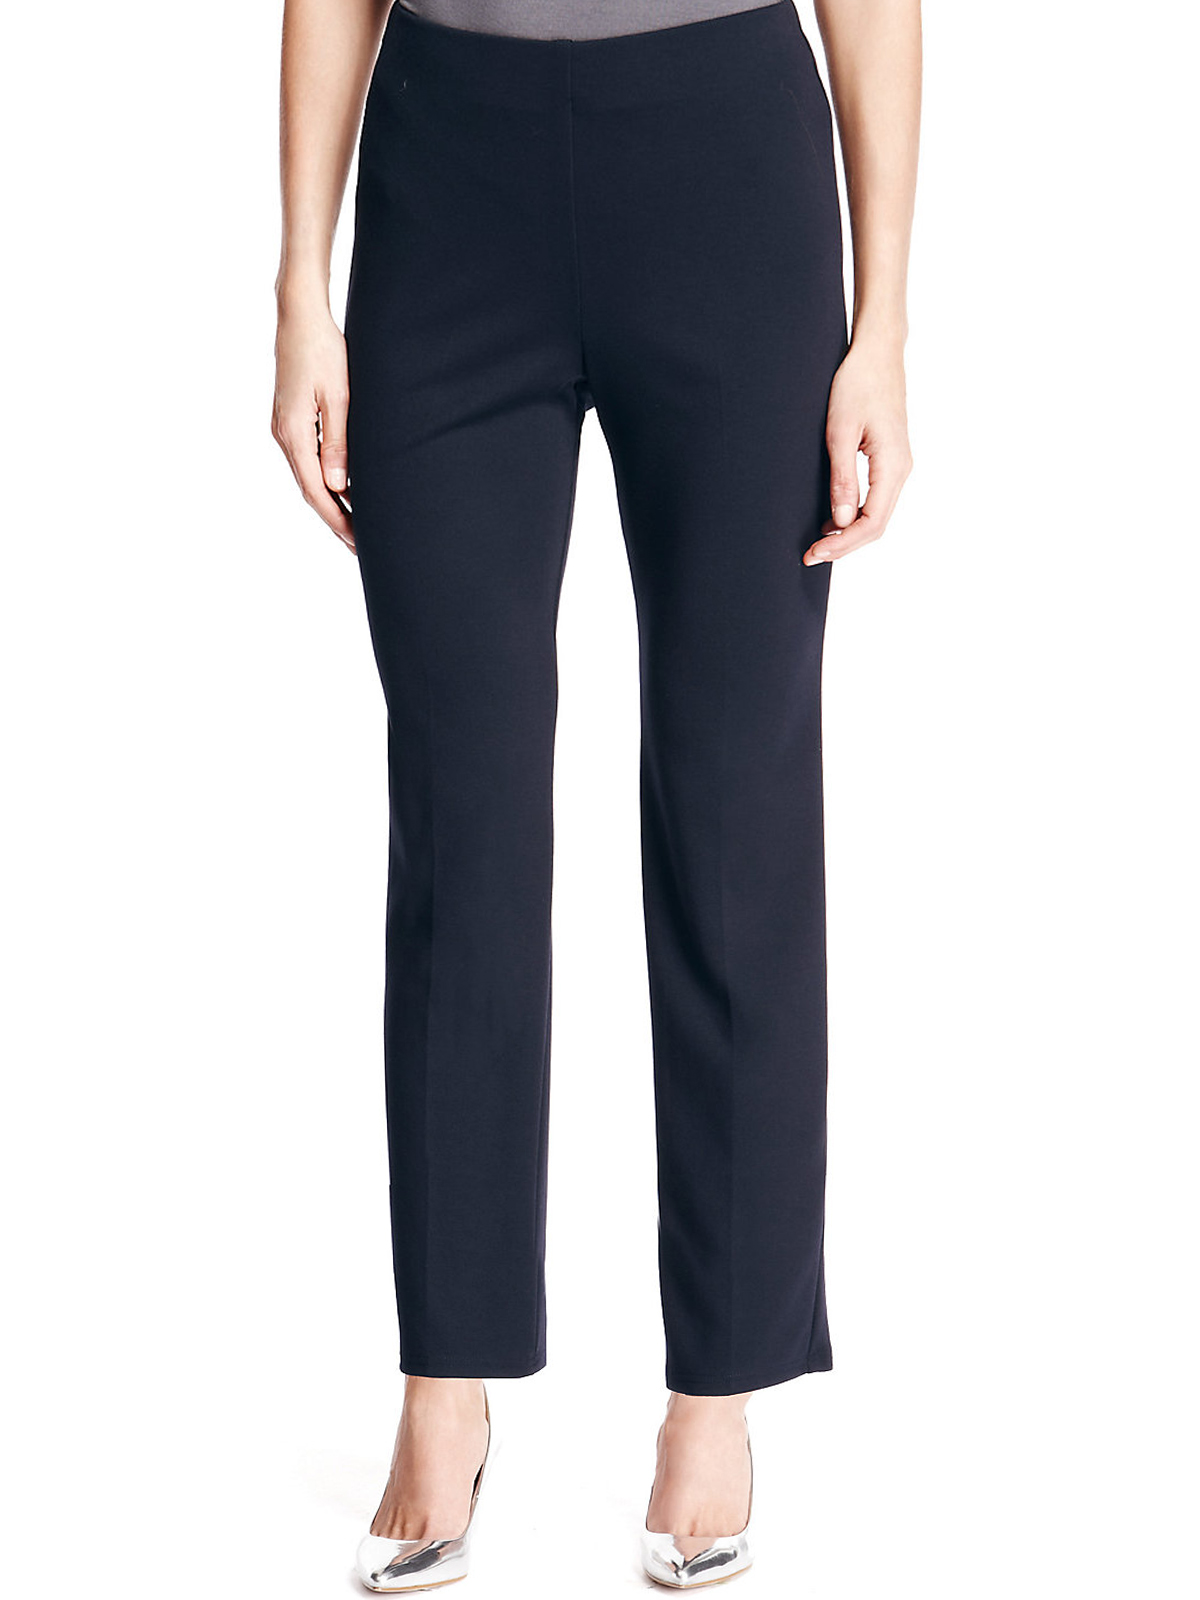 Marks and Spencer - - M&5 NAVY Slim Leg Pull On Ponte Trousers - Size 8 ...